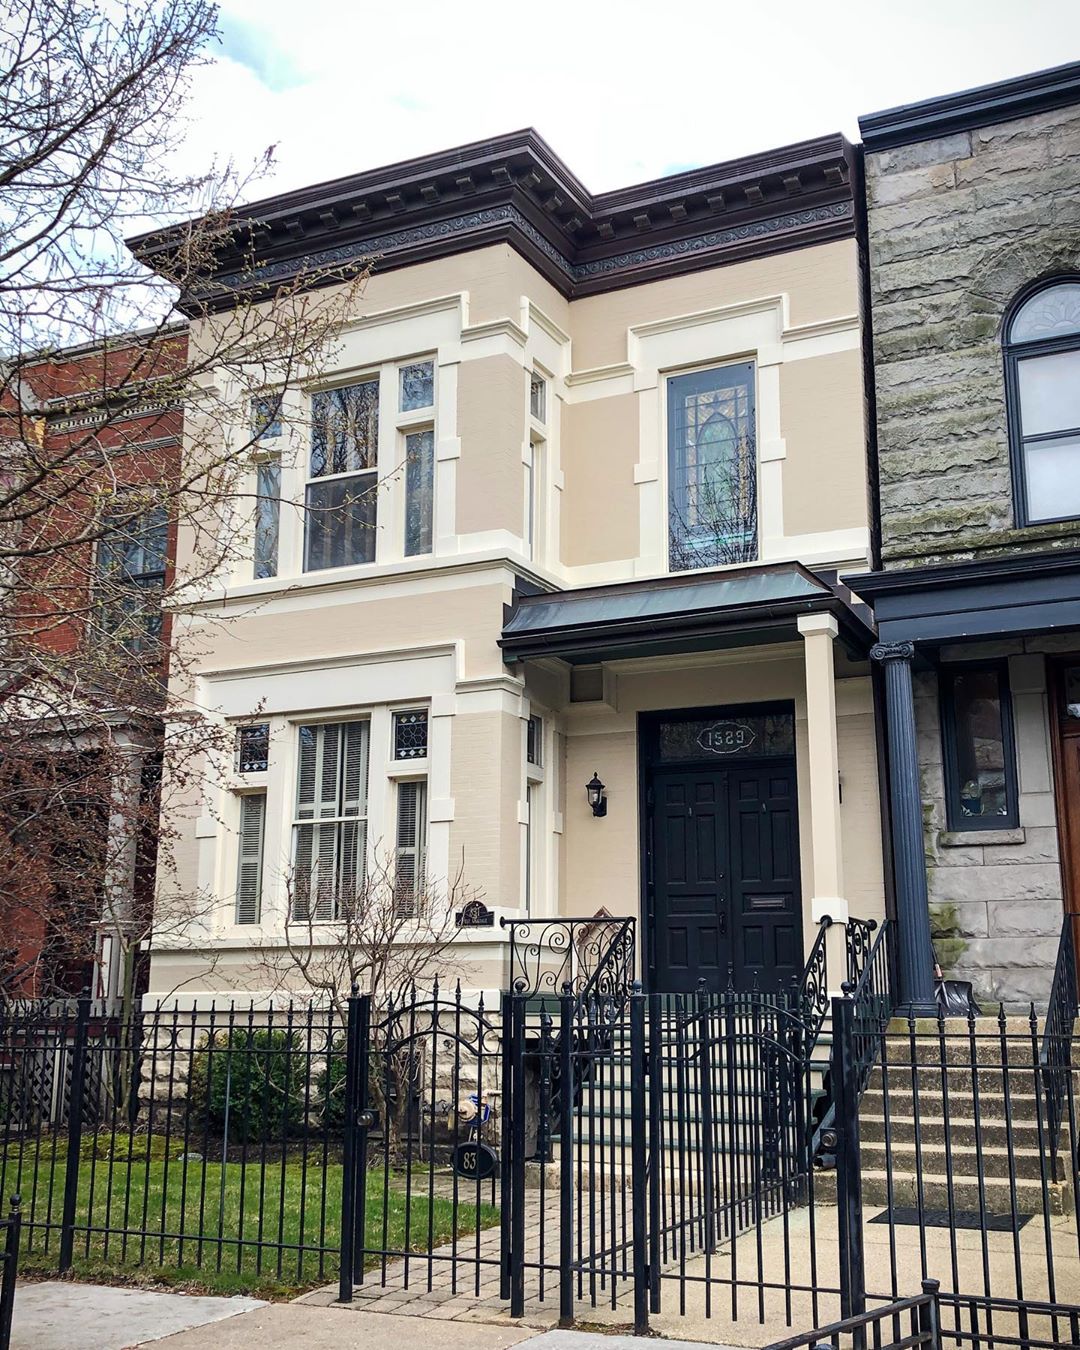 Two Story White Walk Up Home in Lakeview, Chicago. Photo by Instagram user @milliondollarlistingchi